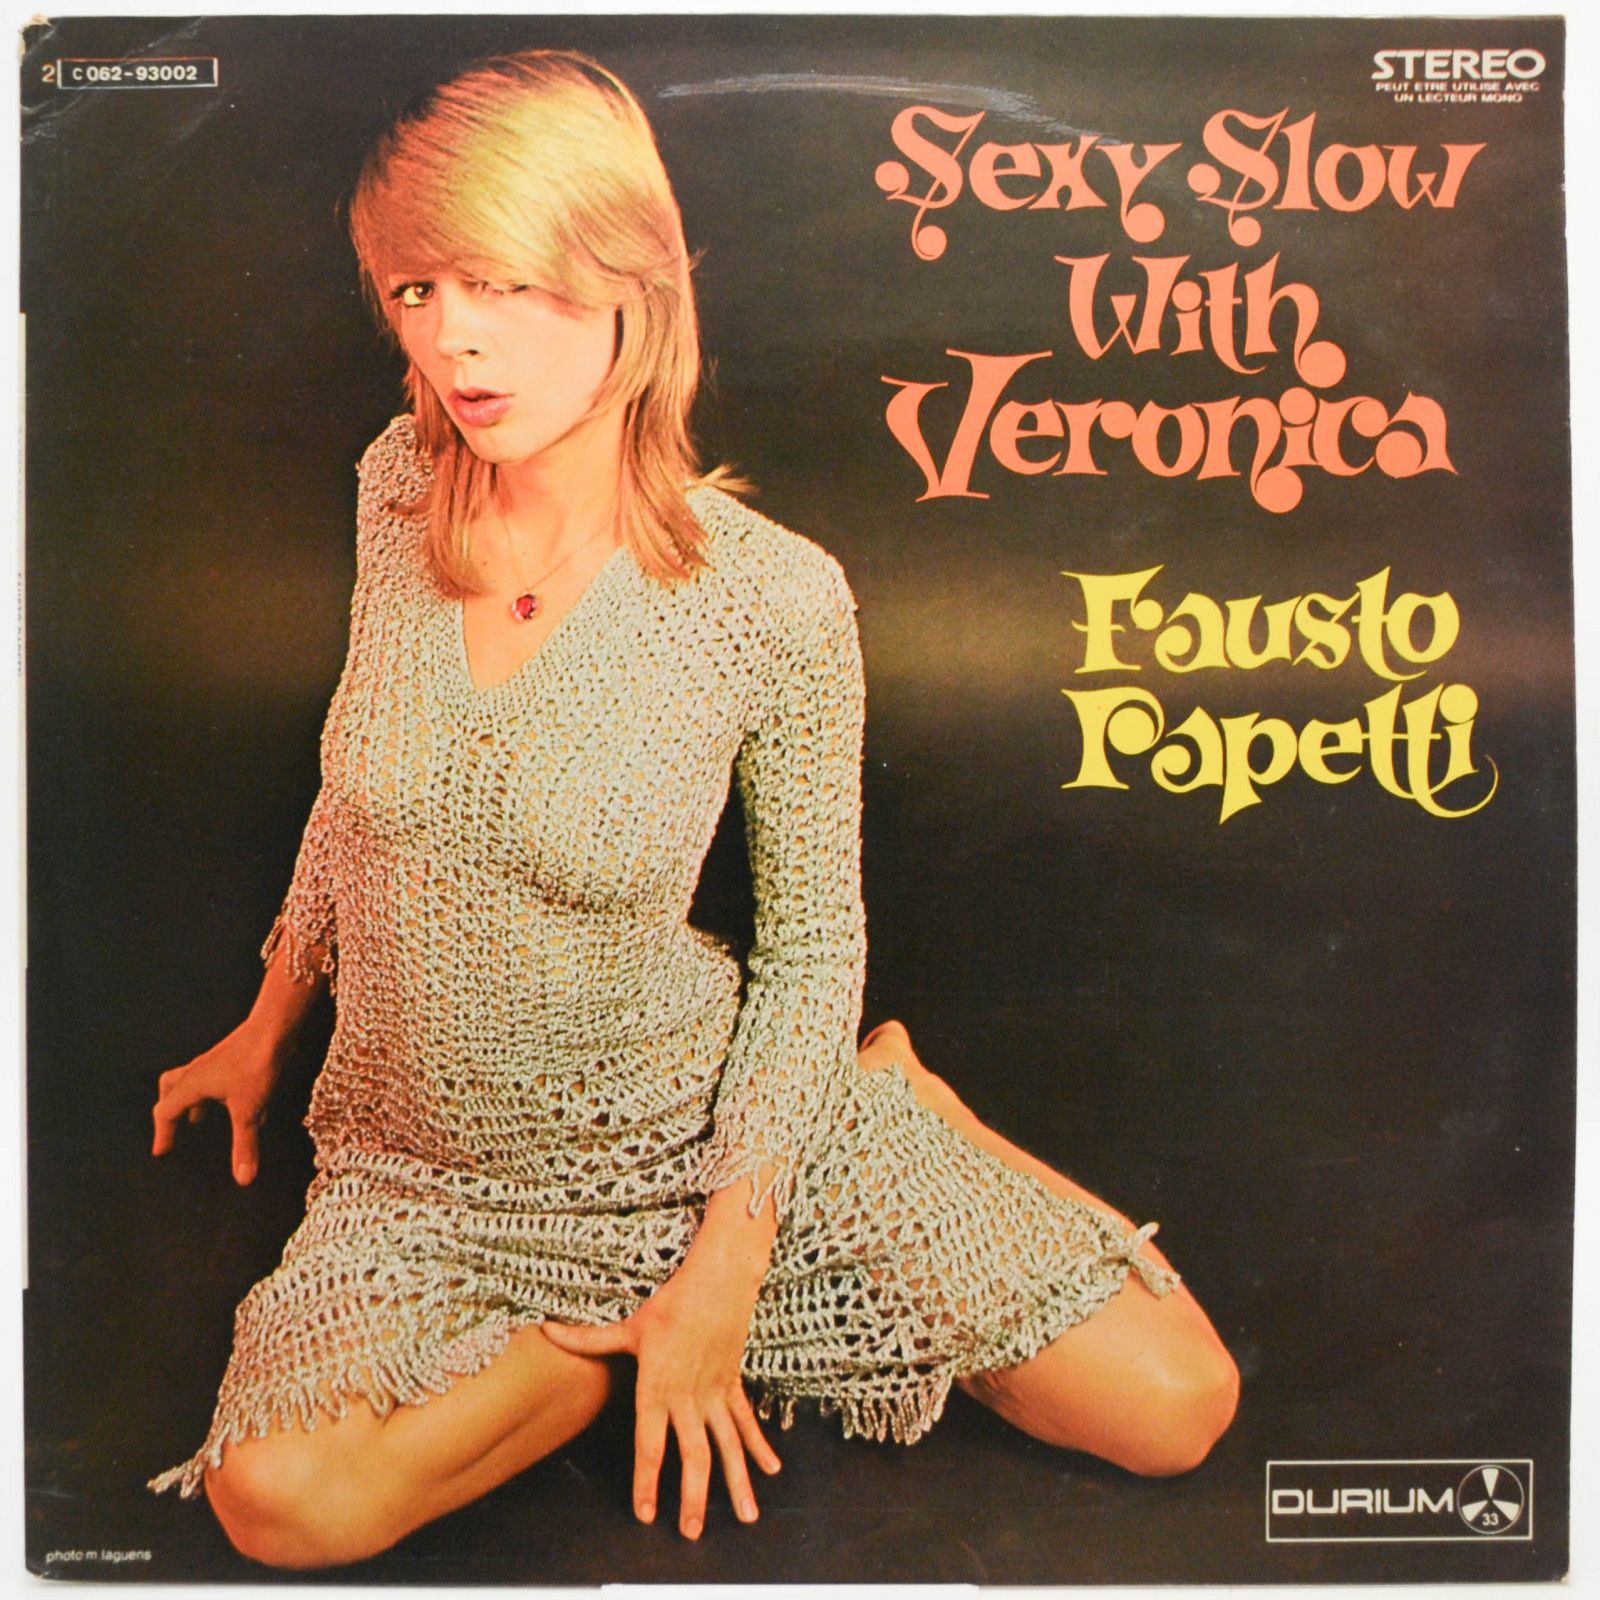 Fausto Papetti — Sexy Slow With Veronica, 1971